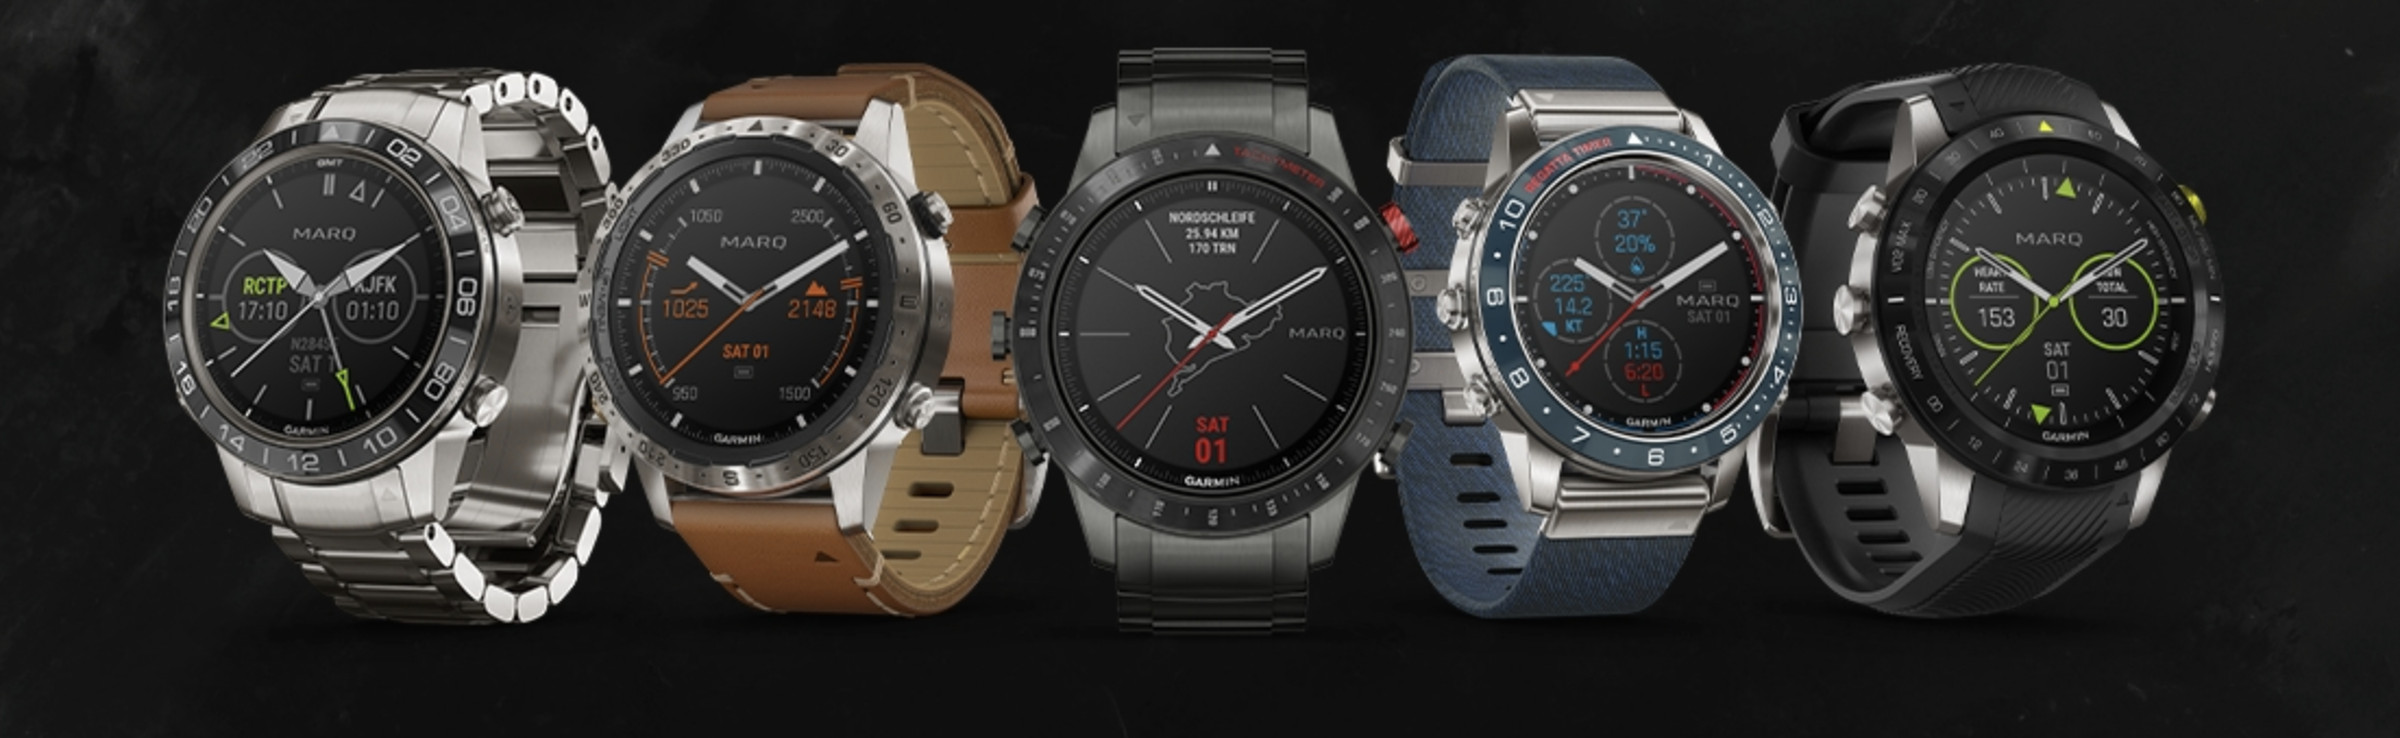 From left to right: The Marq Aviator, Expedition, Driver, Captain, and Athlete.